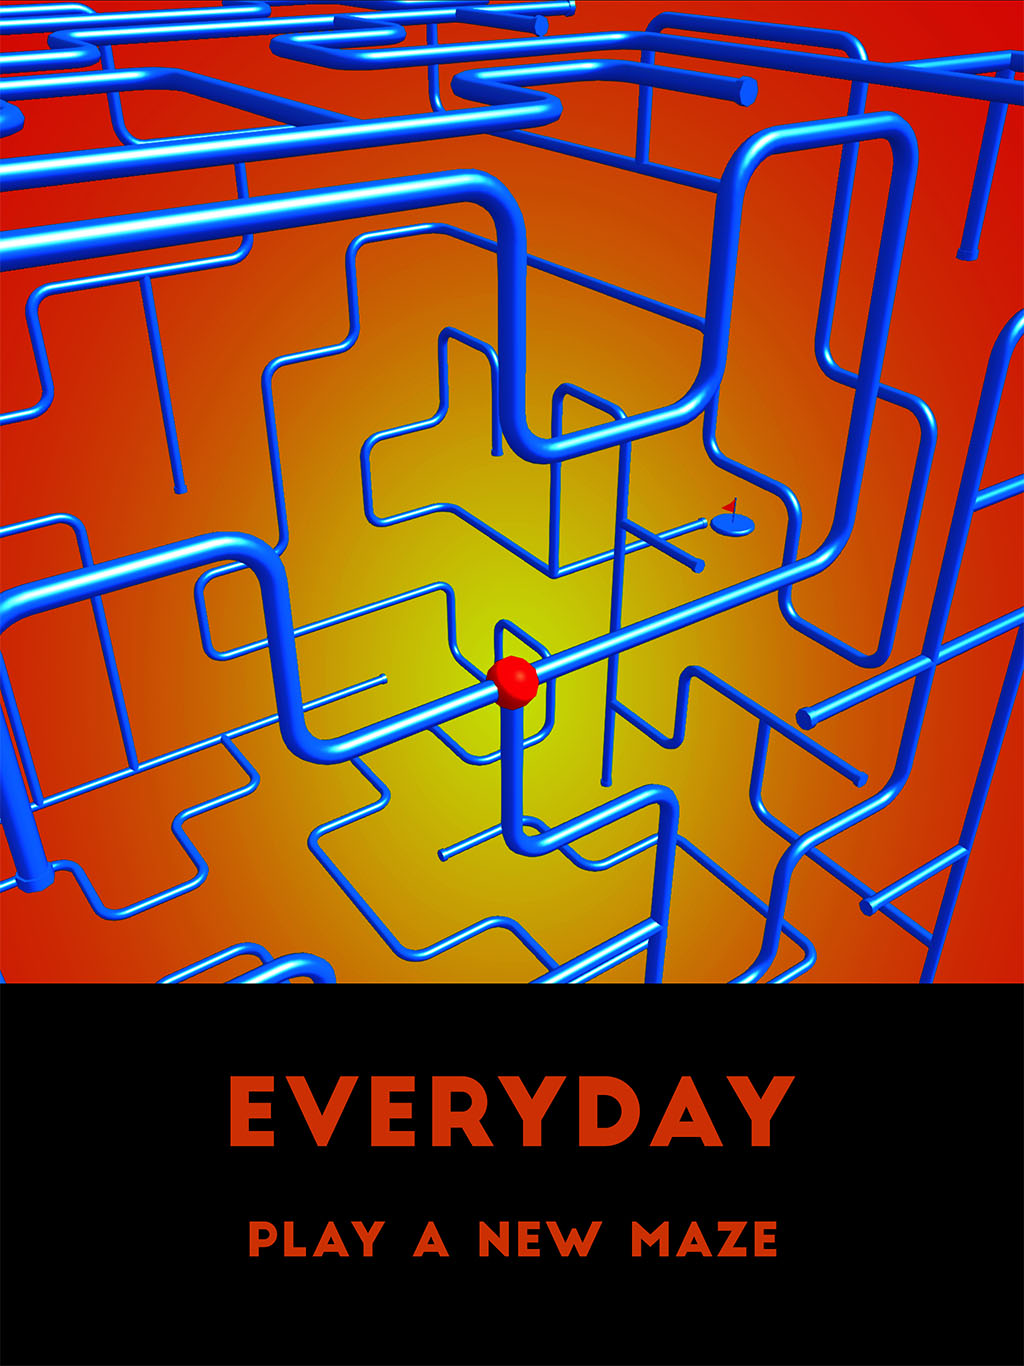 Everyday play a new maze